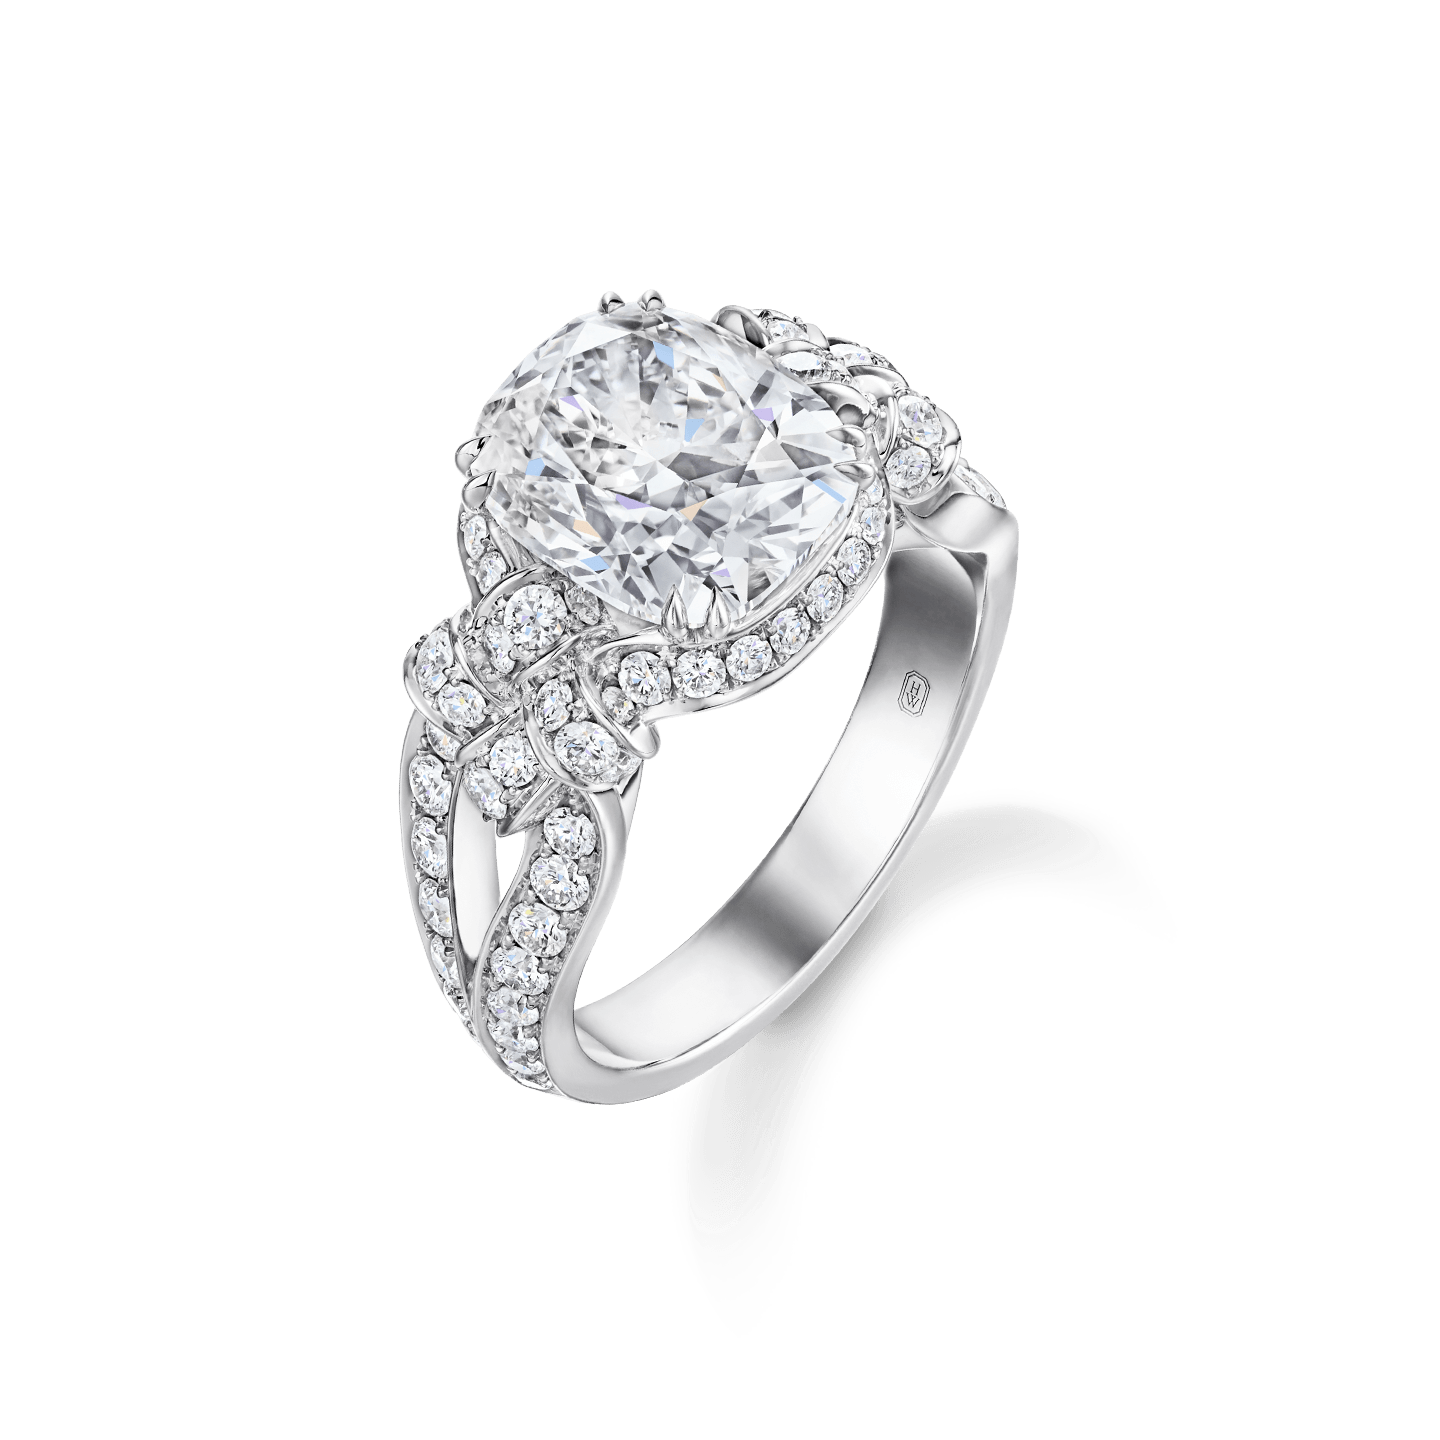 Angled view of the Bridal Couture Cushion-Cut Diamond Engagement Ring